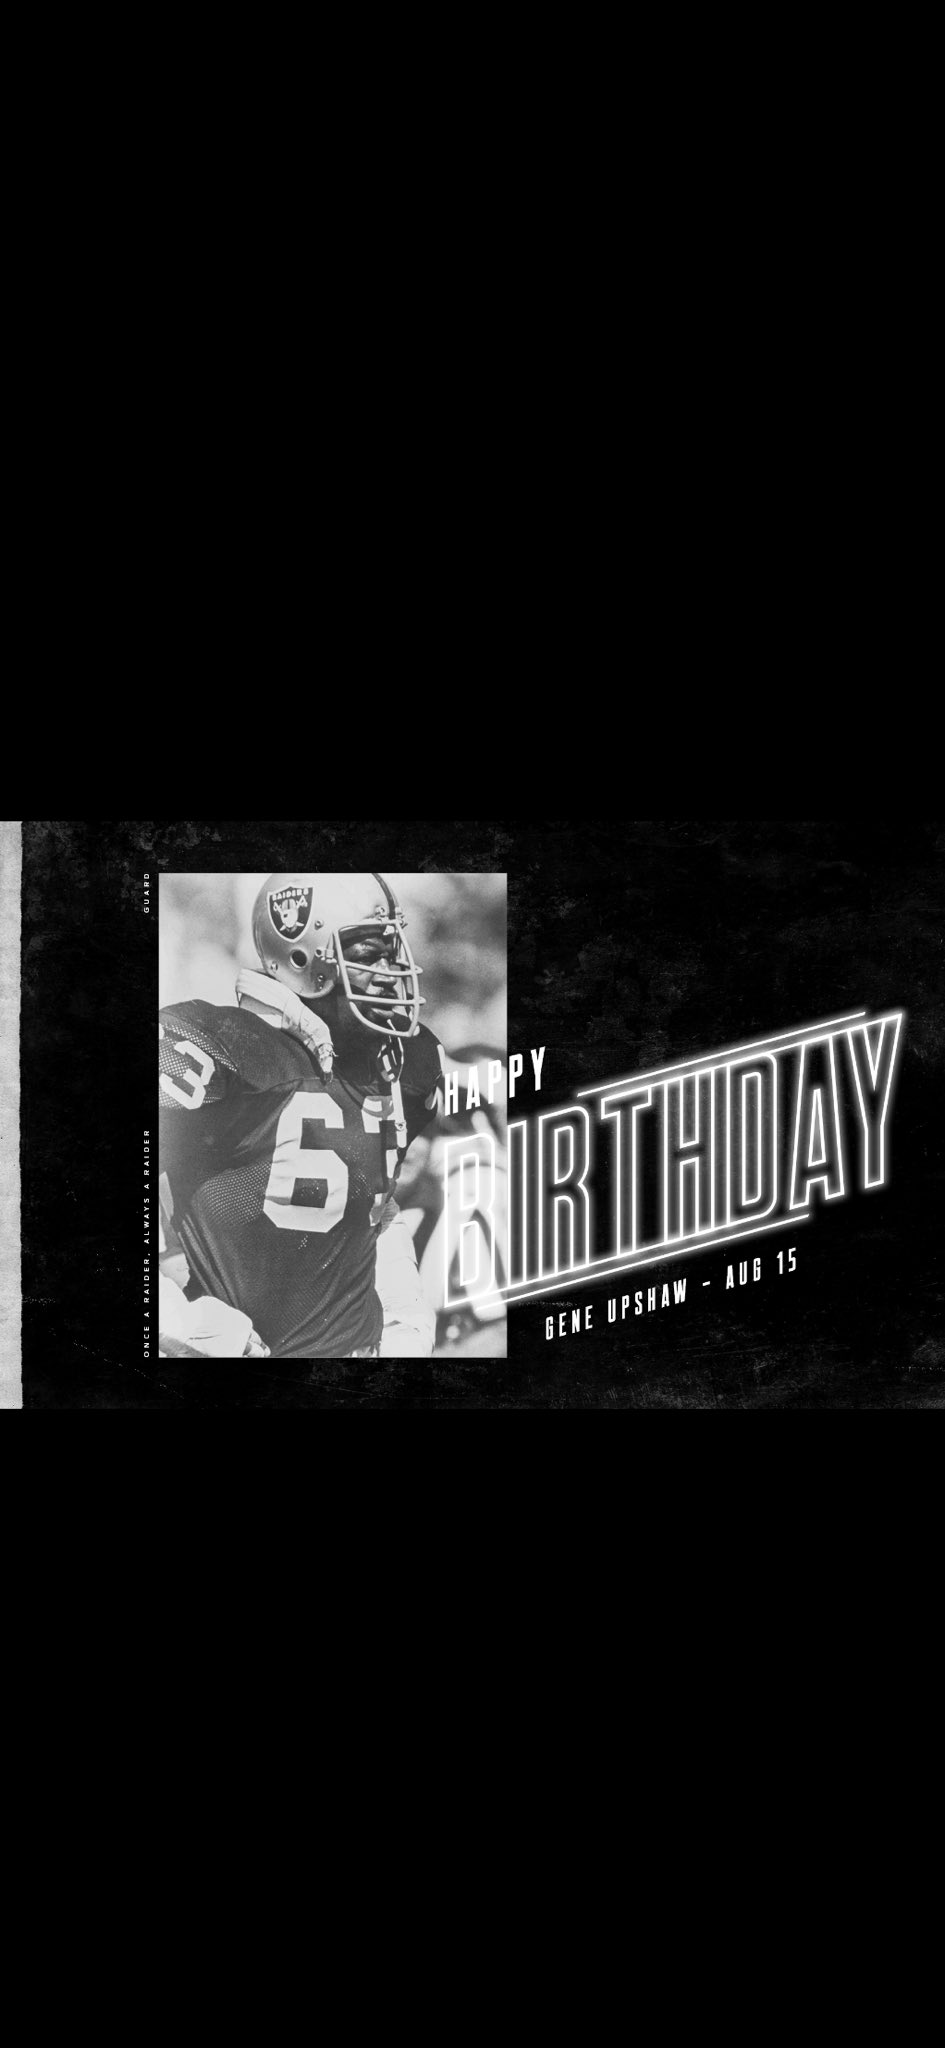 HAPPY BIRTHDAY TO GENE UPSHAW A ALL-TIME GREAT RAIDER LEGEND AND EVEN A BETTER MAN      RIP FRIEND      